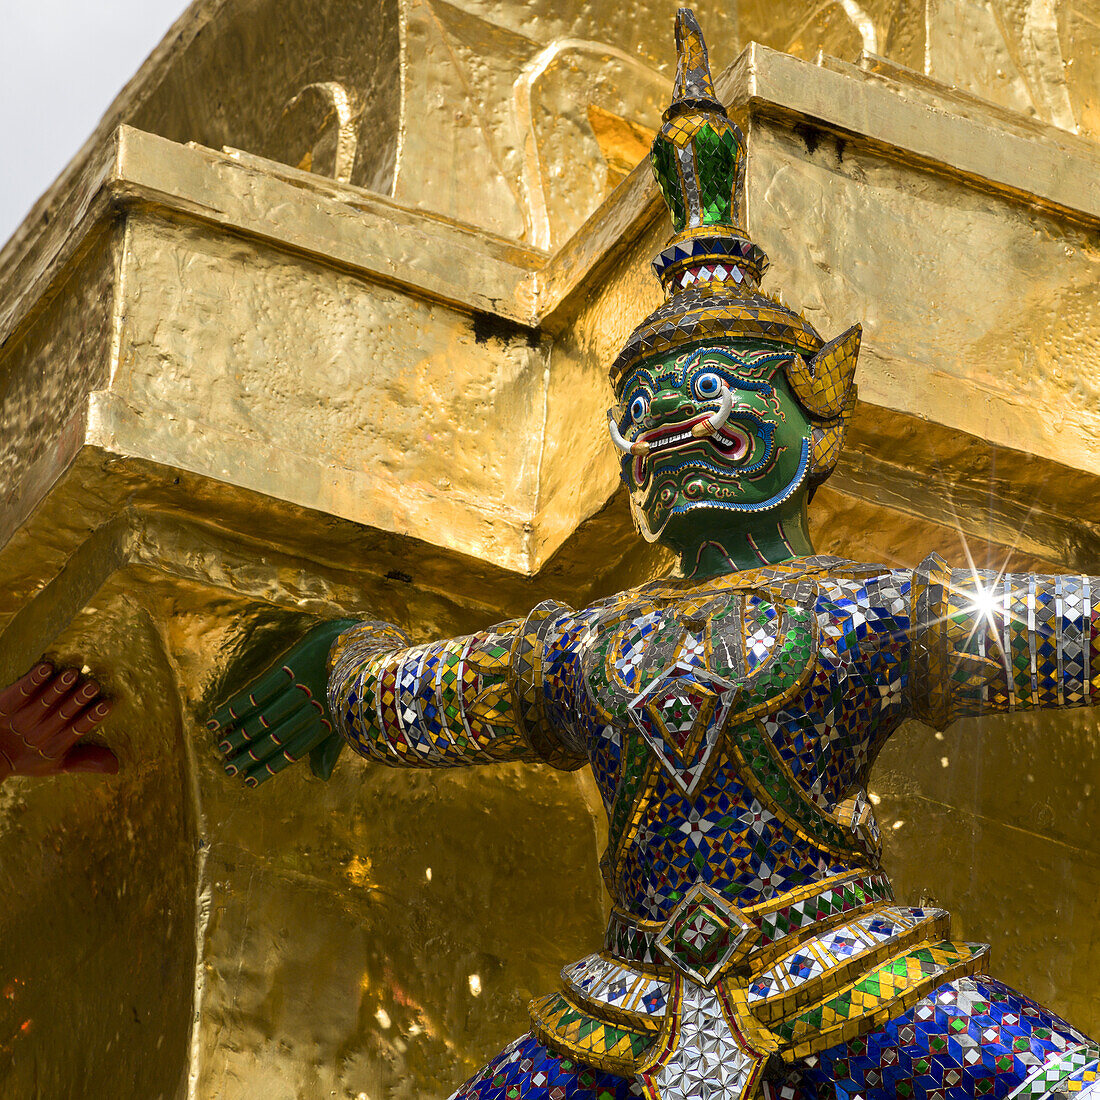 Colourful, Ornate Statue In From Of A Gold Wall, Temple Of The Emerald Buddha (Wat Phra Kaew); Bangkok, Thailand